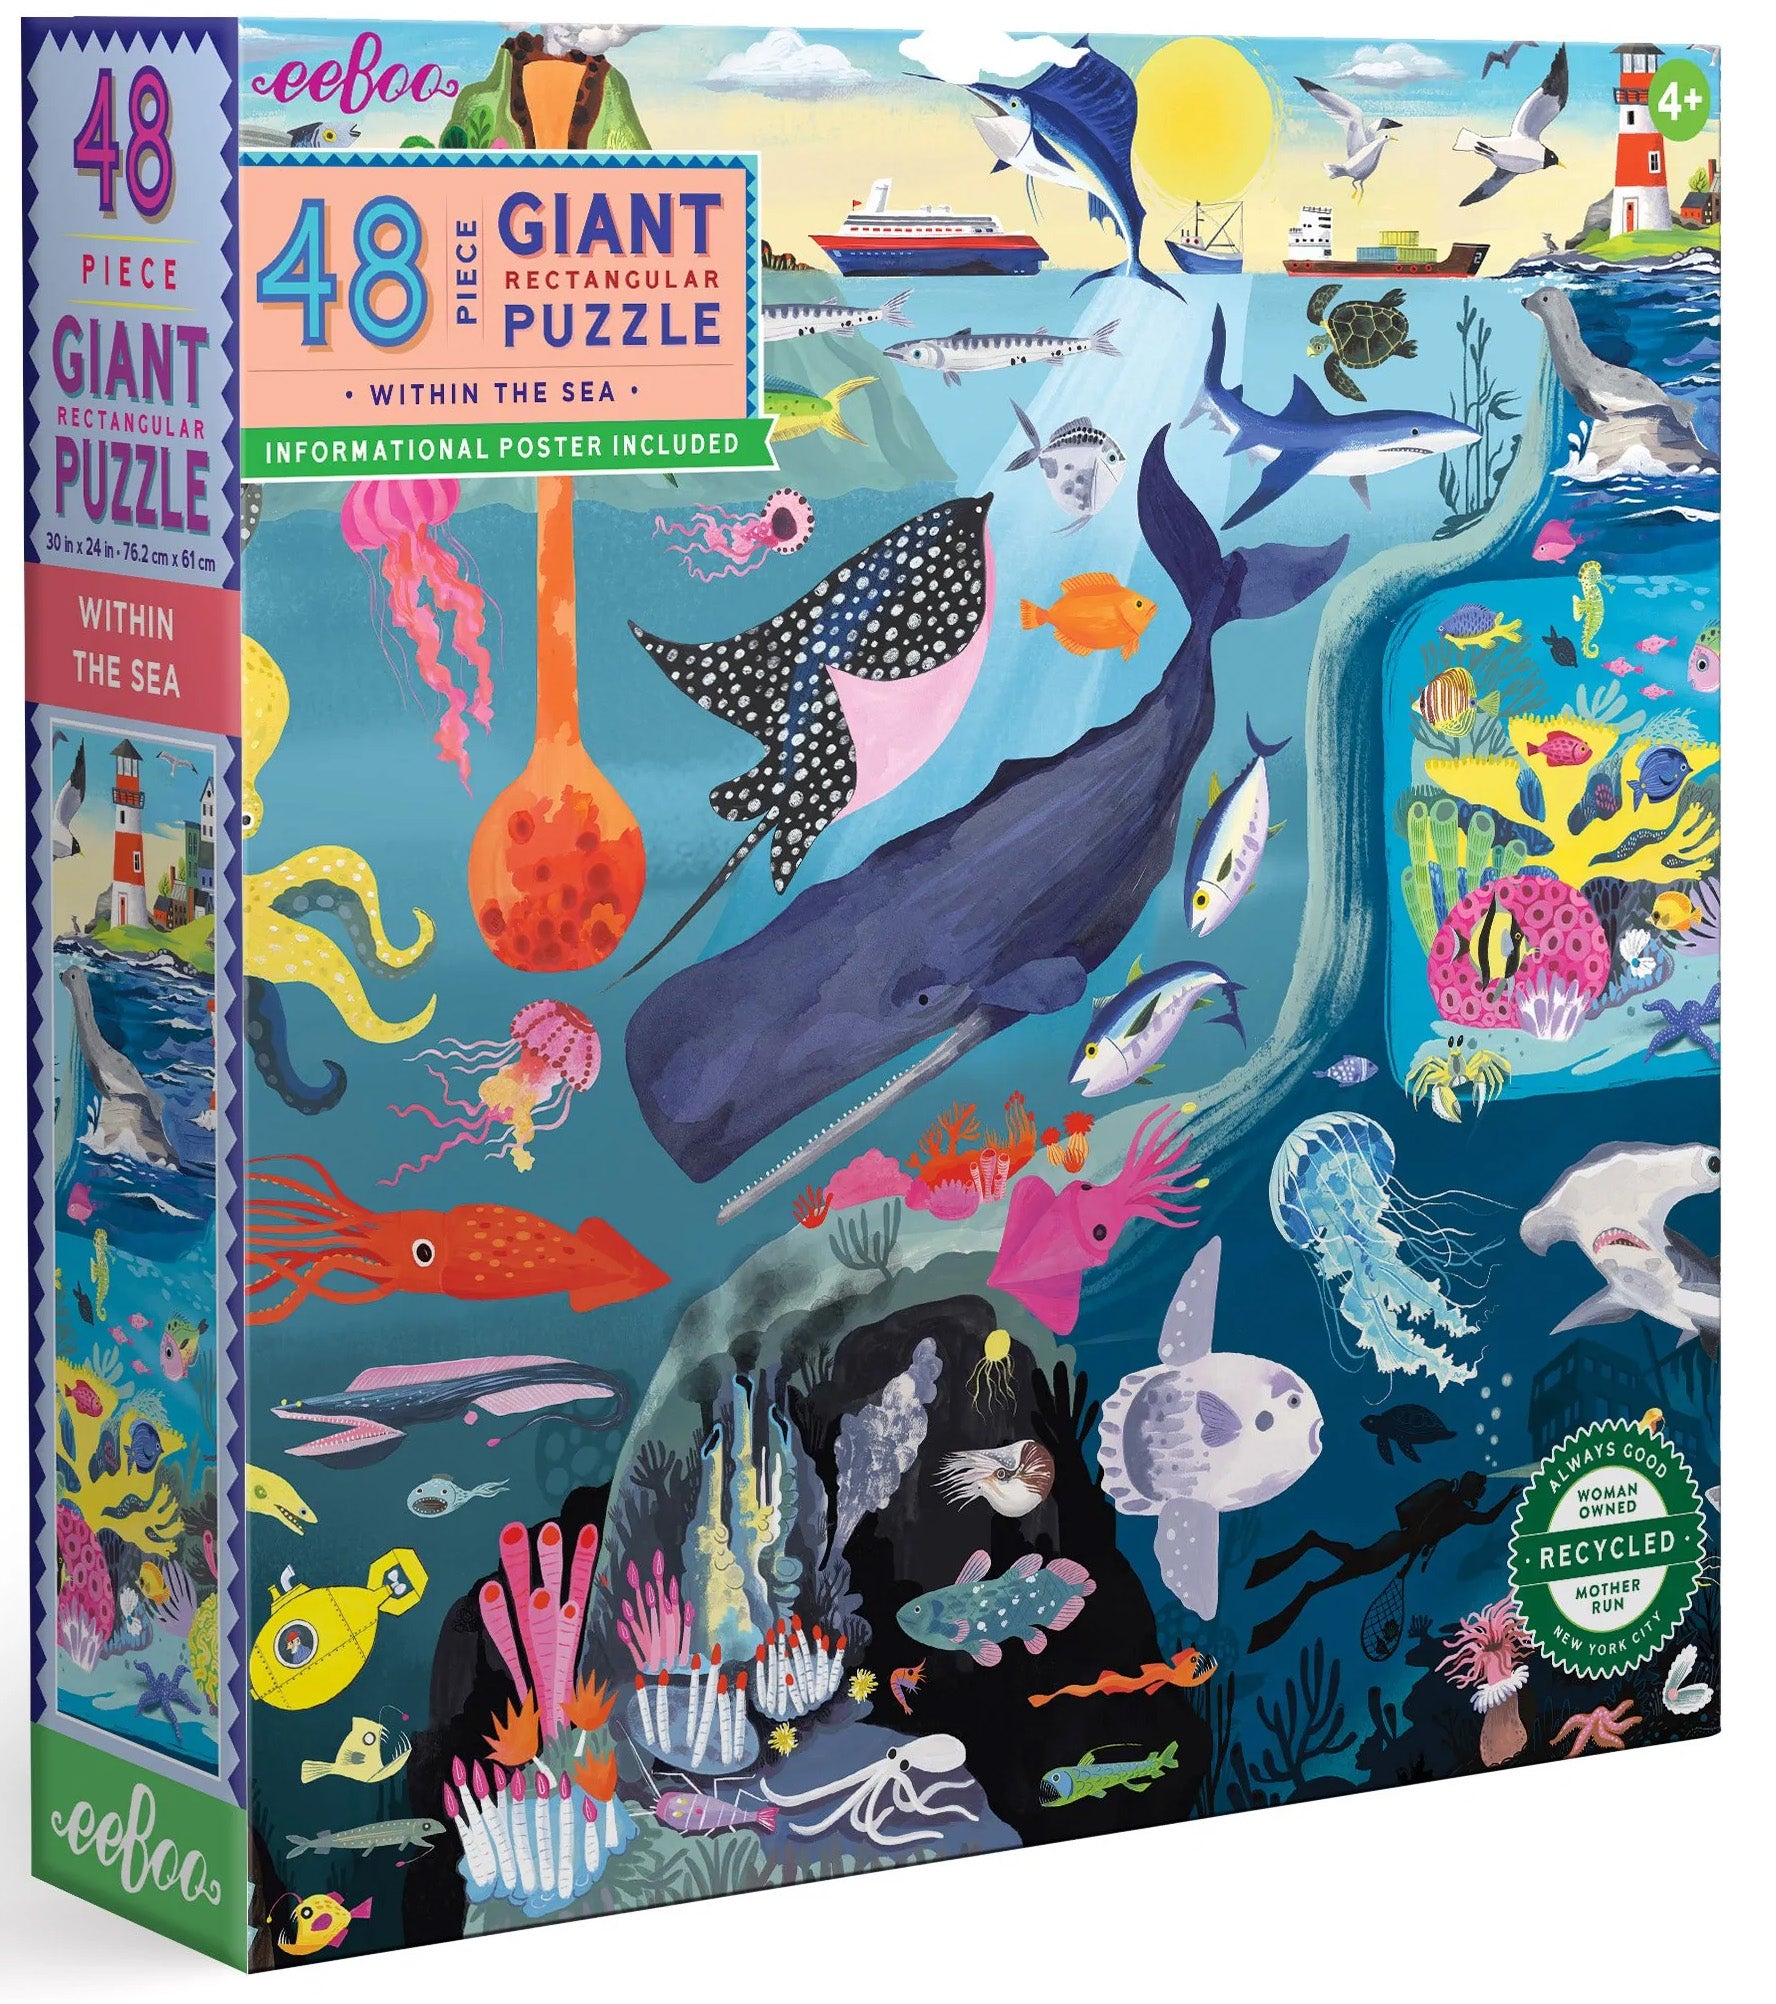 Within the Sea 48pc Puzzle